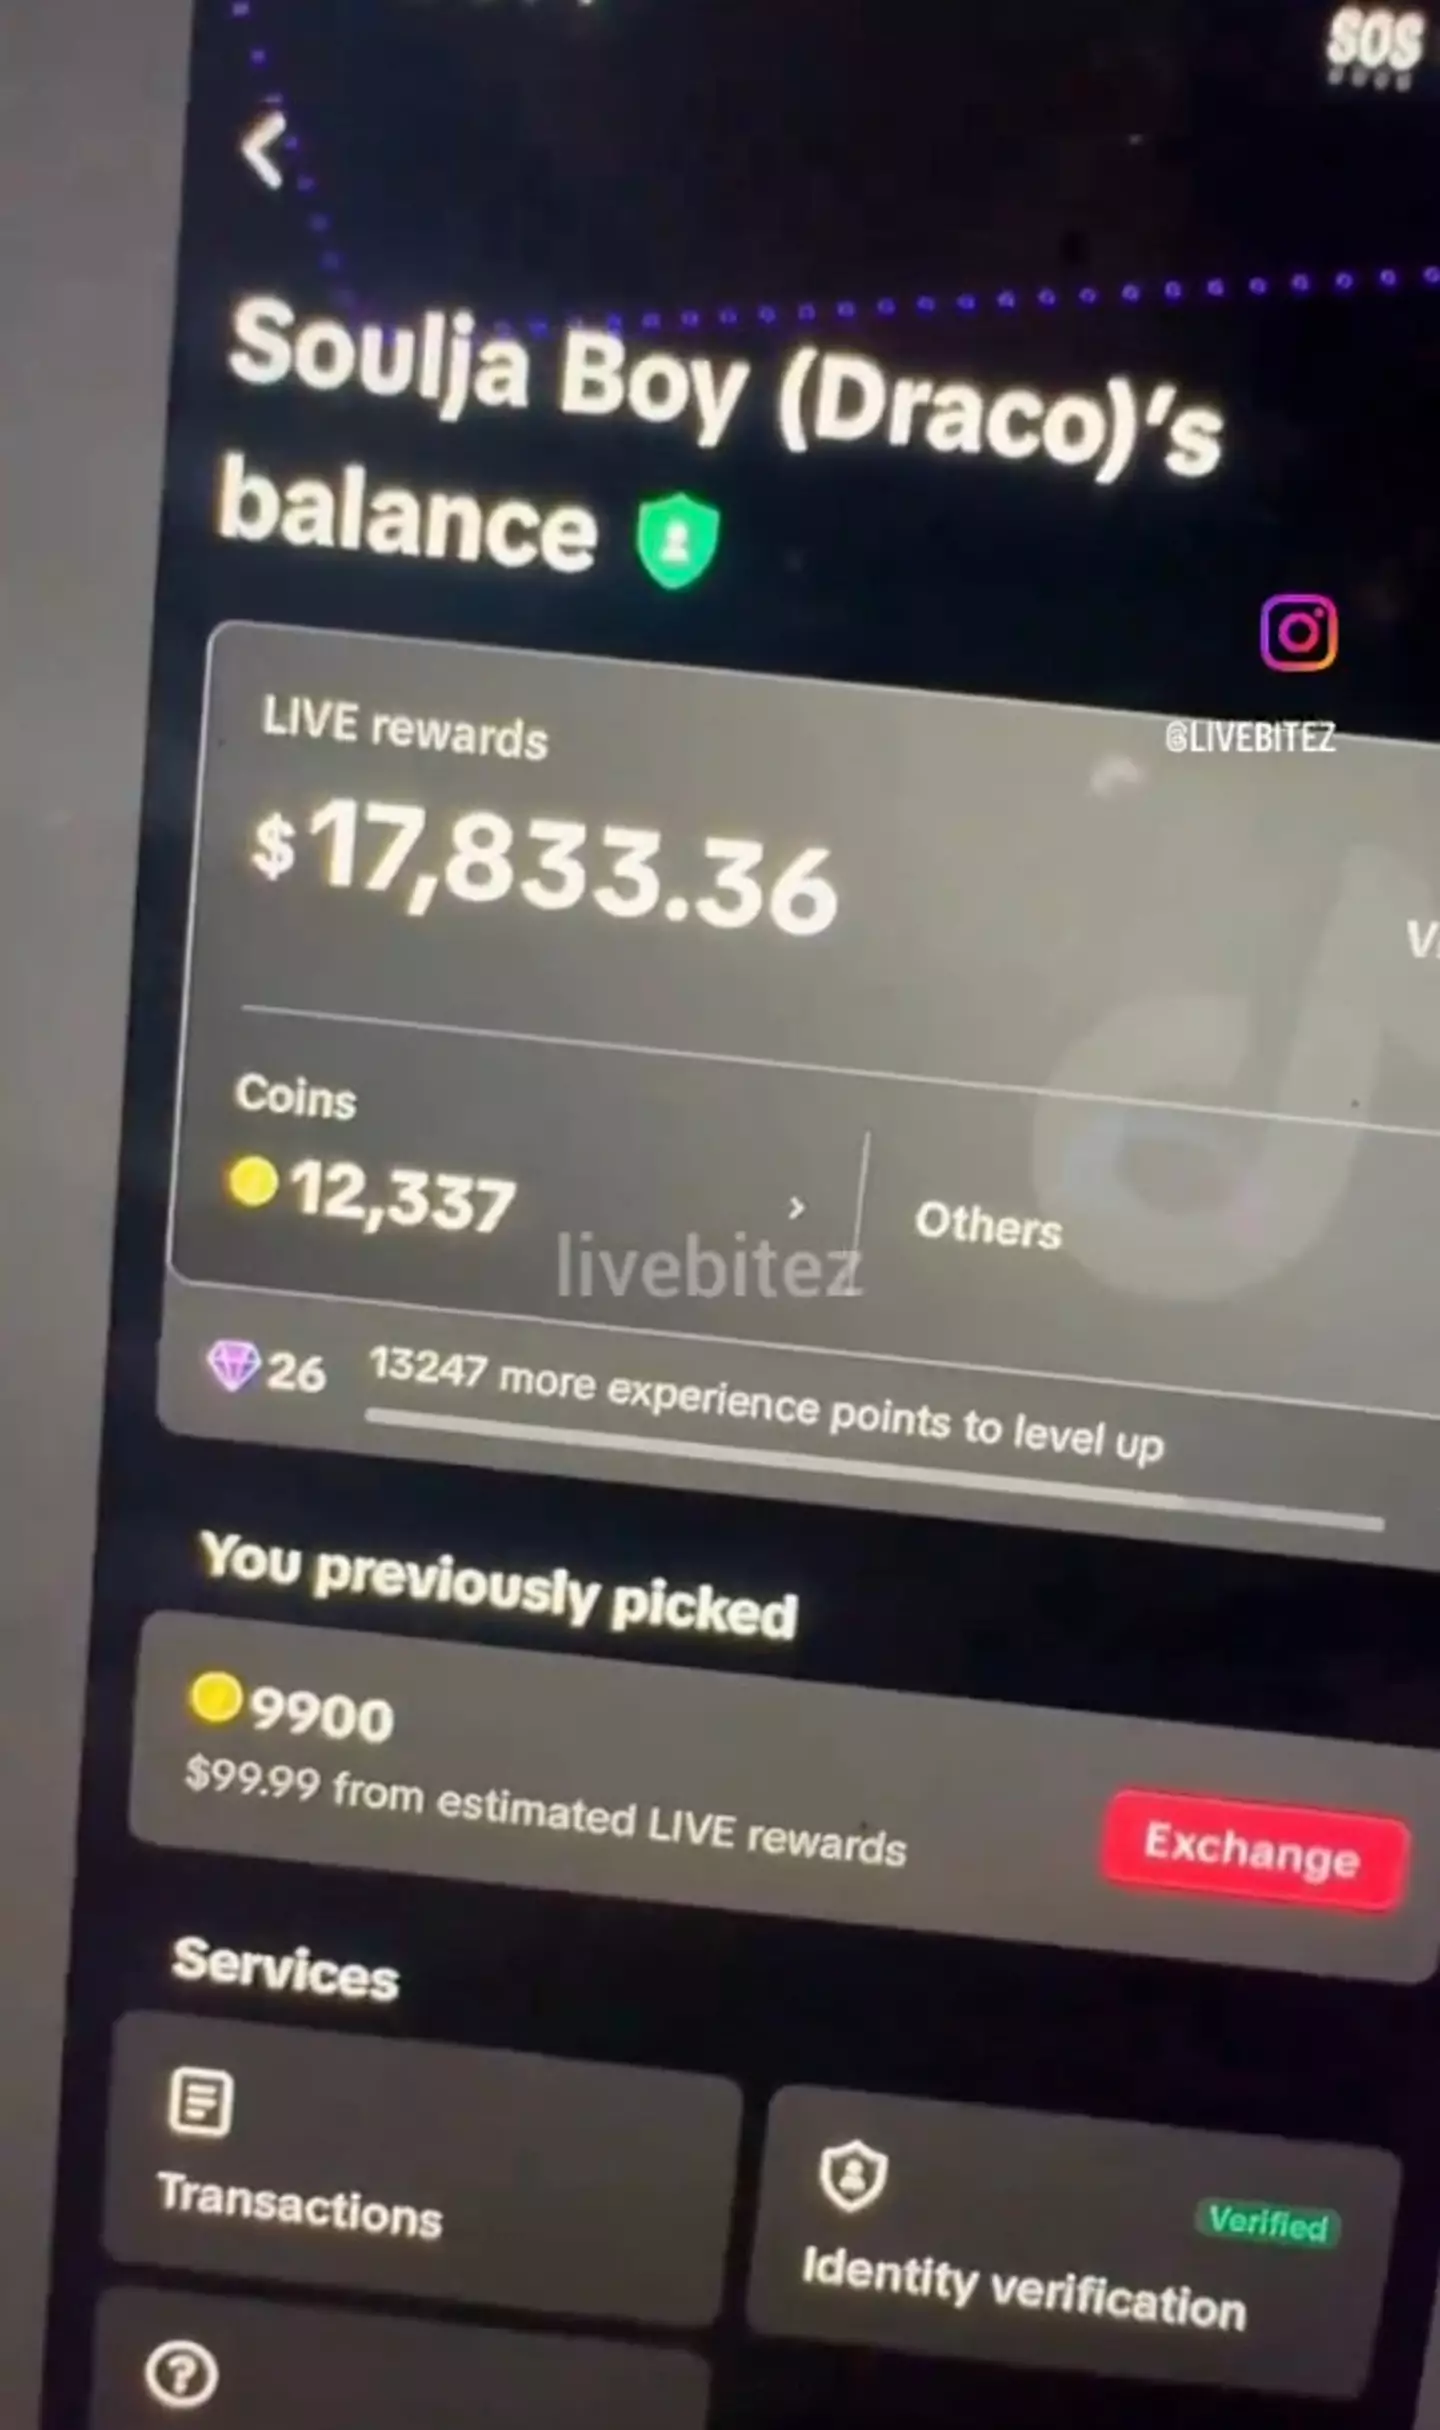 The rapper raked in thousands of dollars after just one live on TikTok.